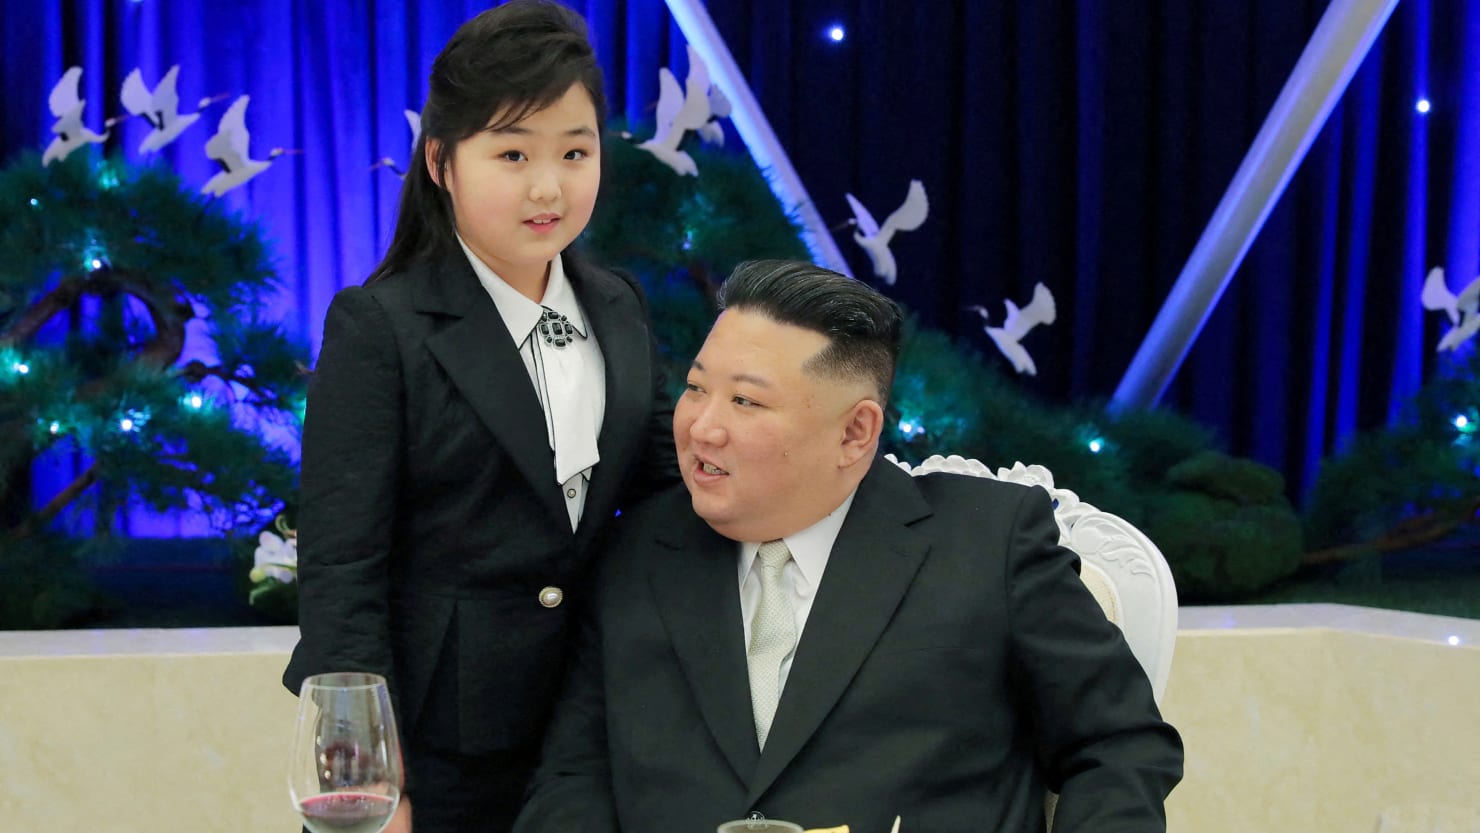 Kim Jong Uns Daughter Ju Ae Could Knock Out His Sister, Yo Jong, in North Korea Succession Feud pic image